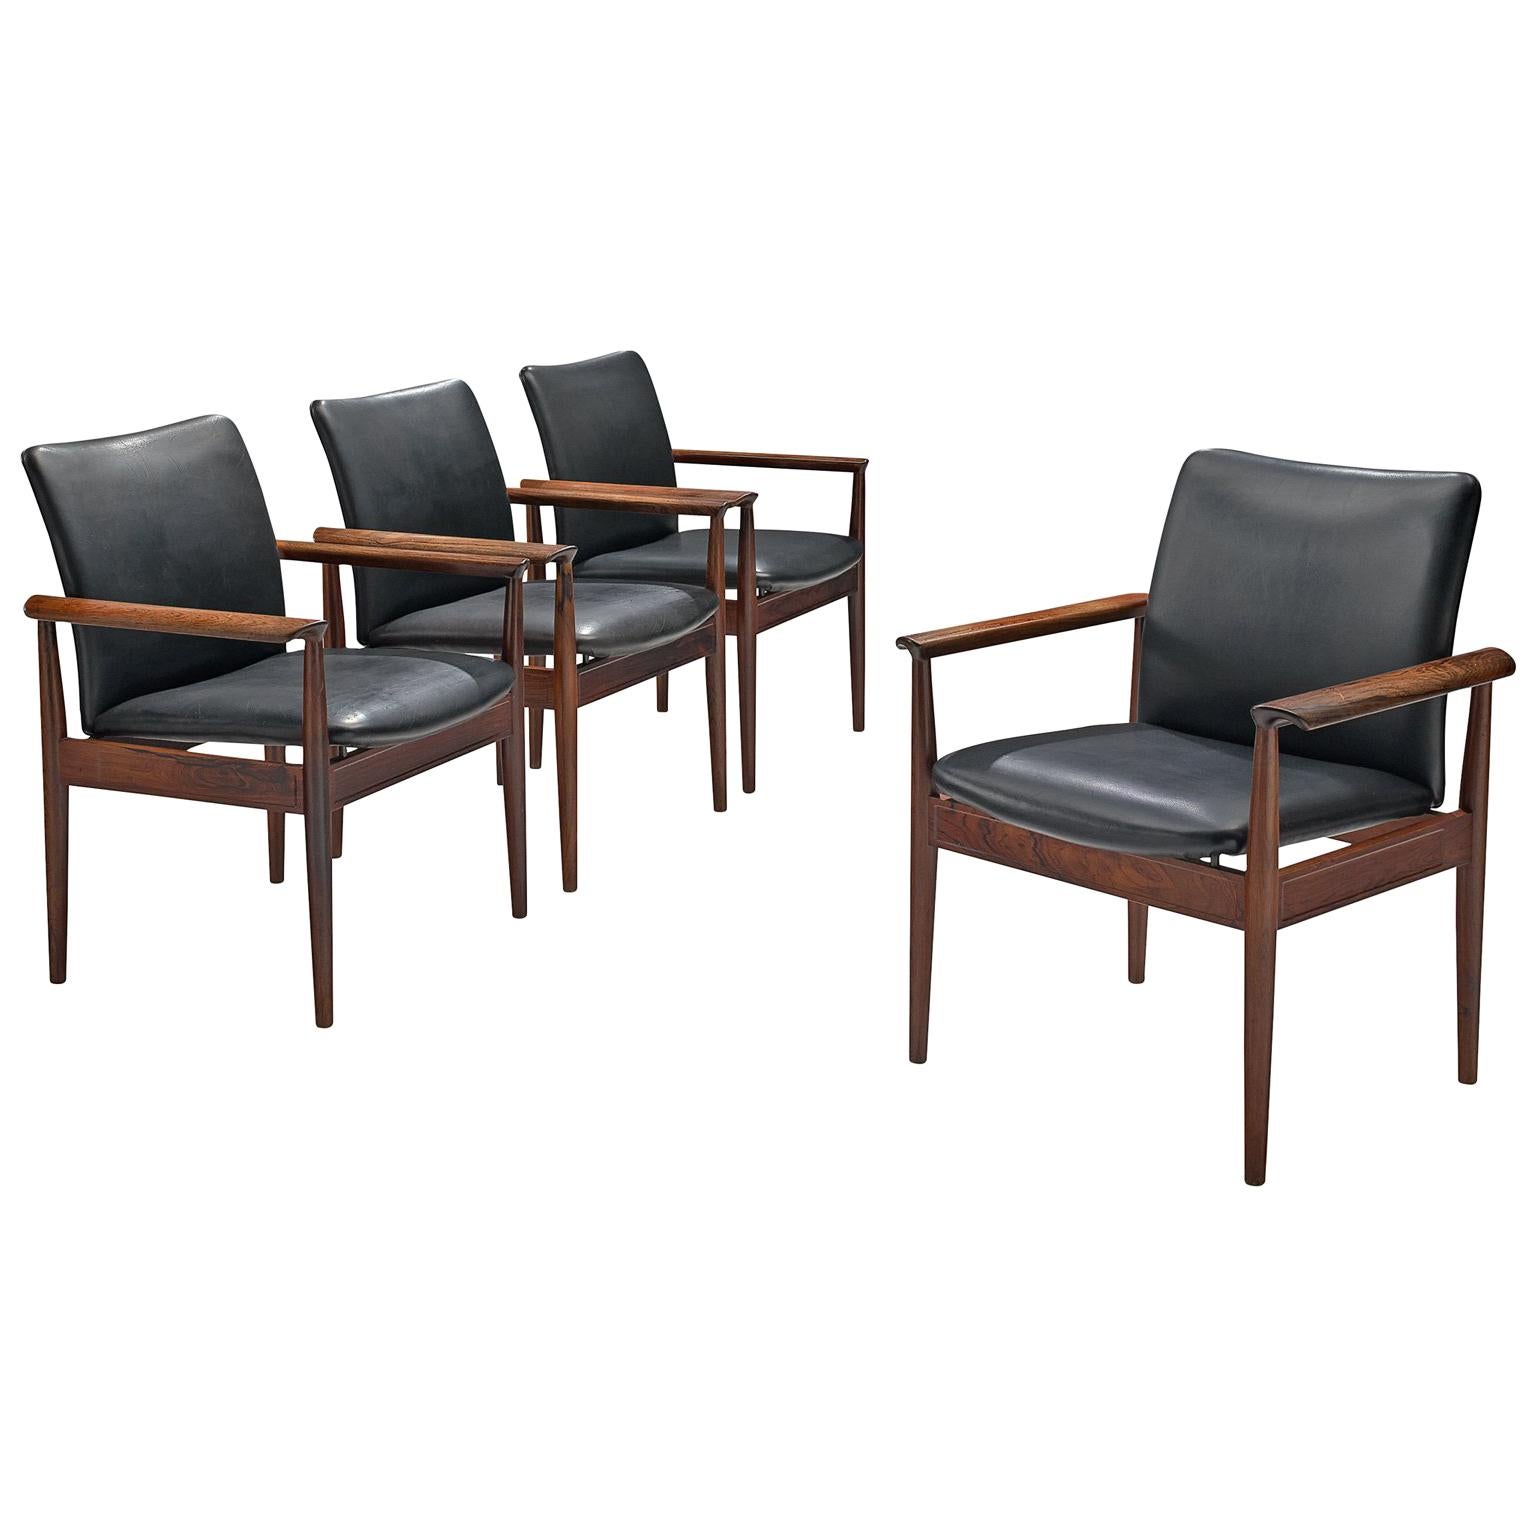 Finn Juhl Set of Diplomat Chairs in Rosewood and Black Leather